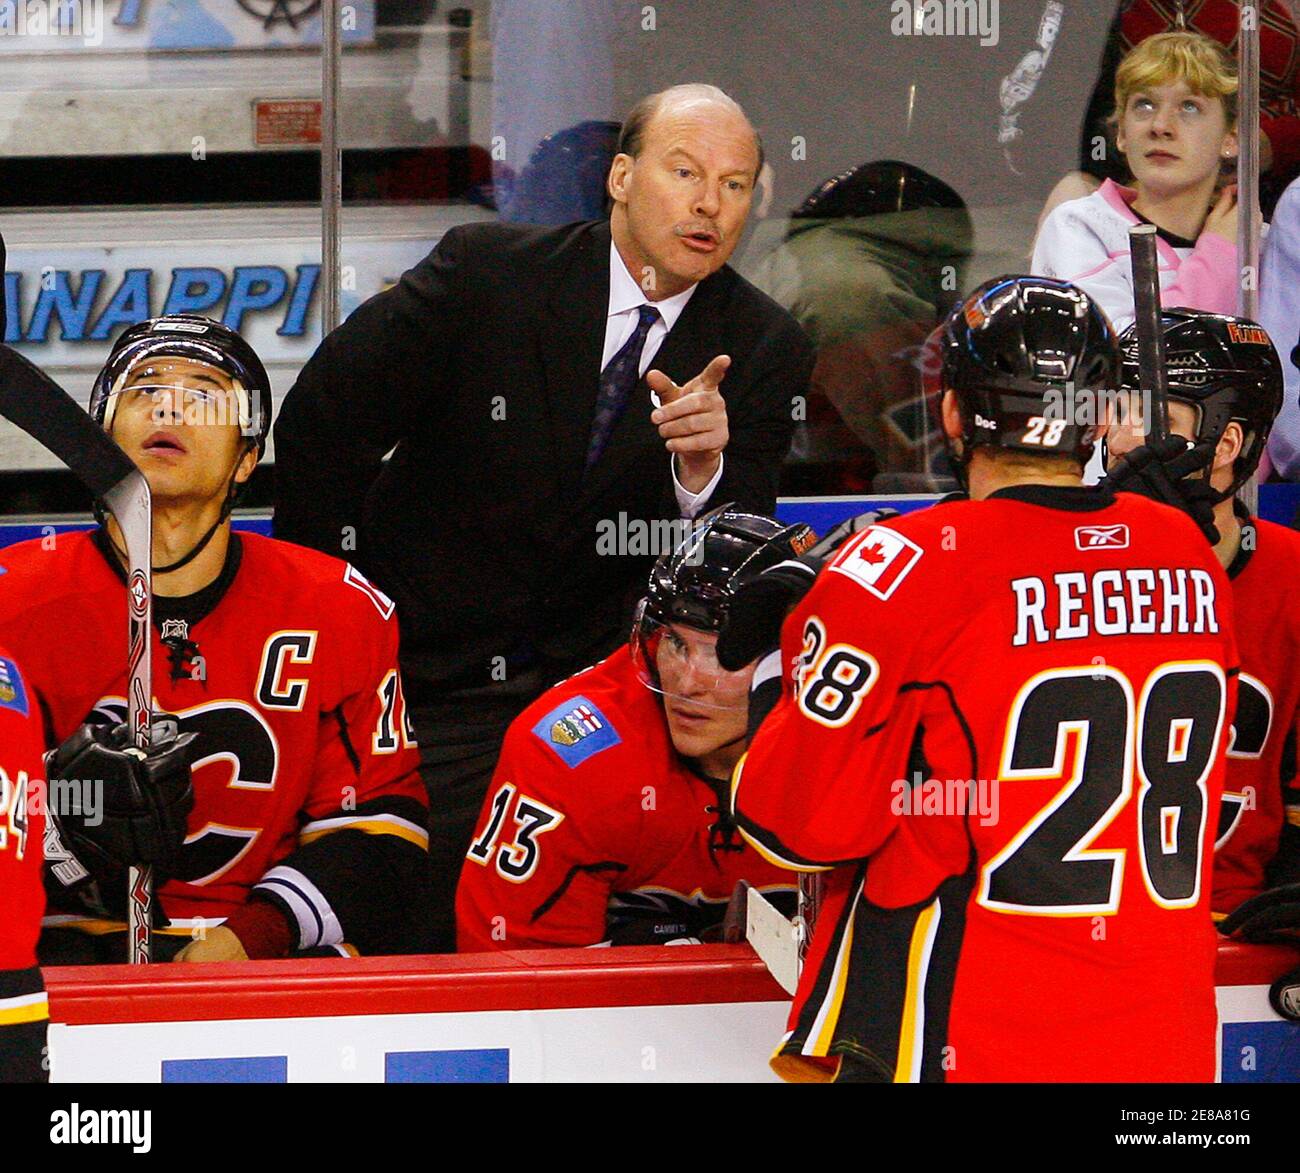 Calgary Flames head coach Mike Keenan (C) gives out last minute  instructions to his team during the third period of his NHL hockey game  against the Nashville Predators in Calgary, Alberta, January